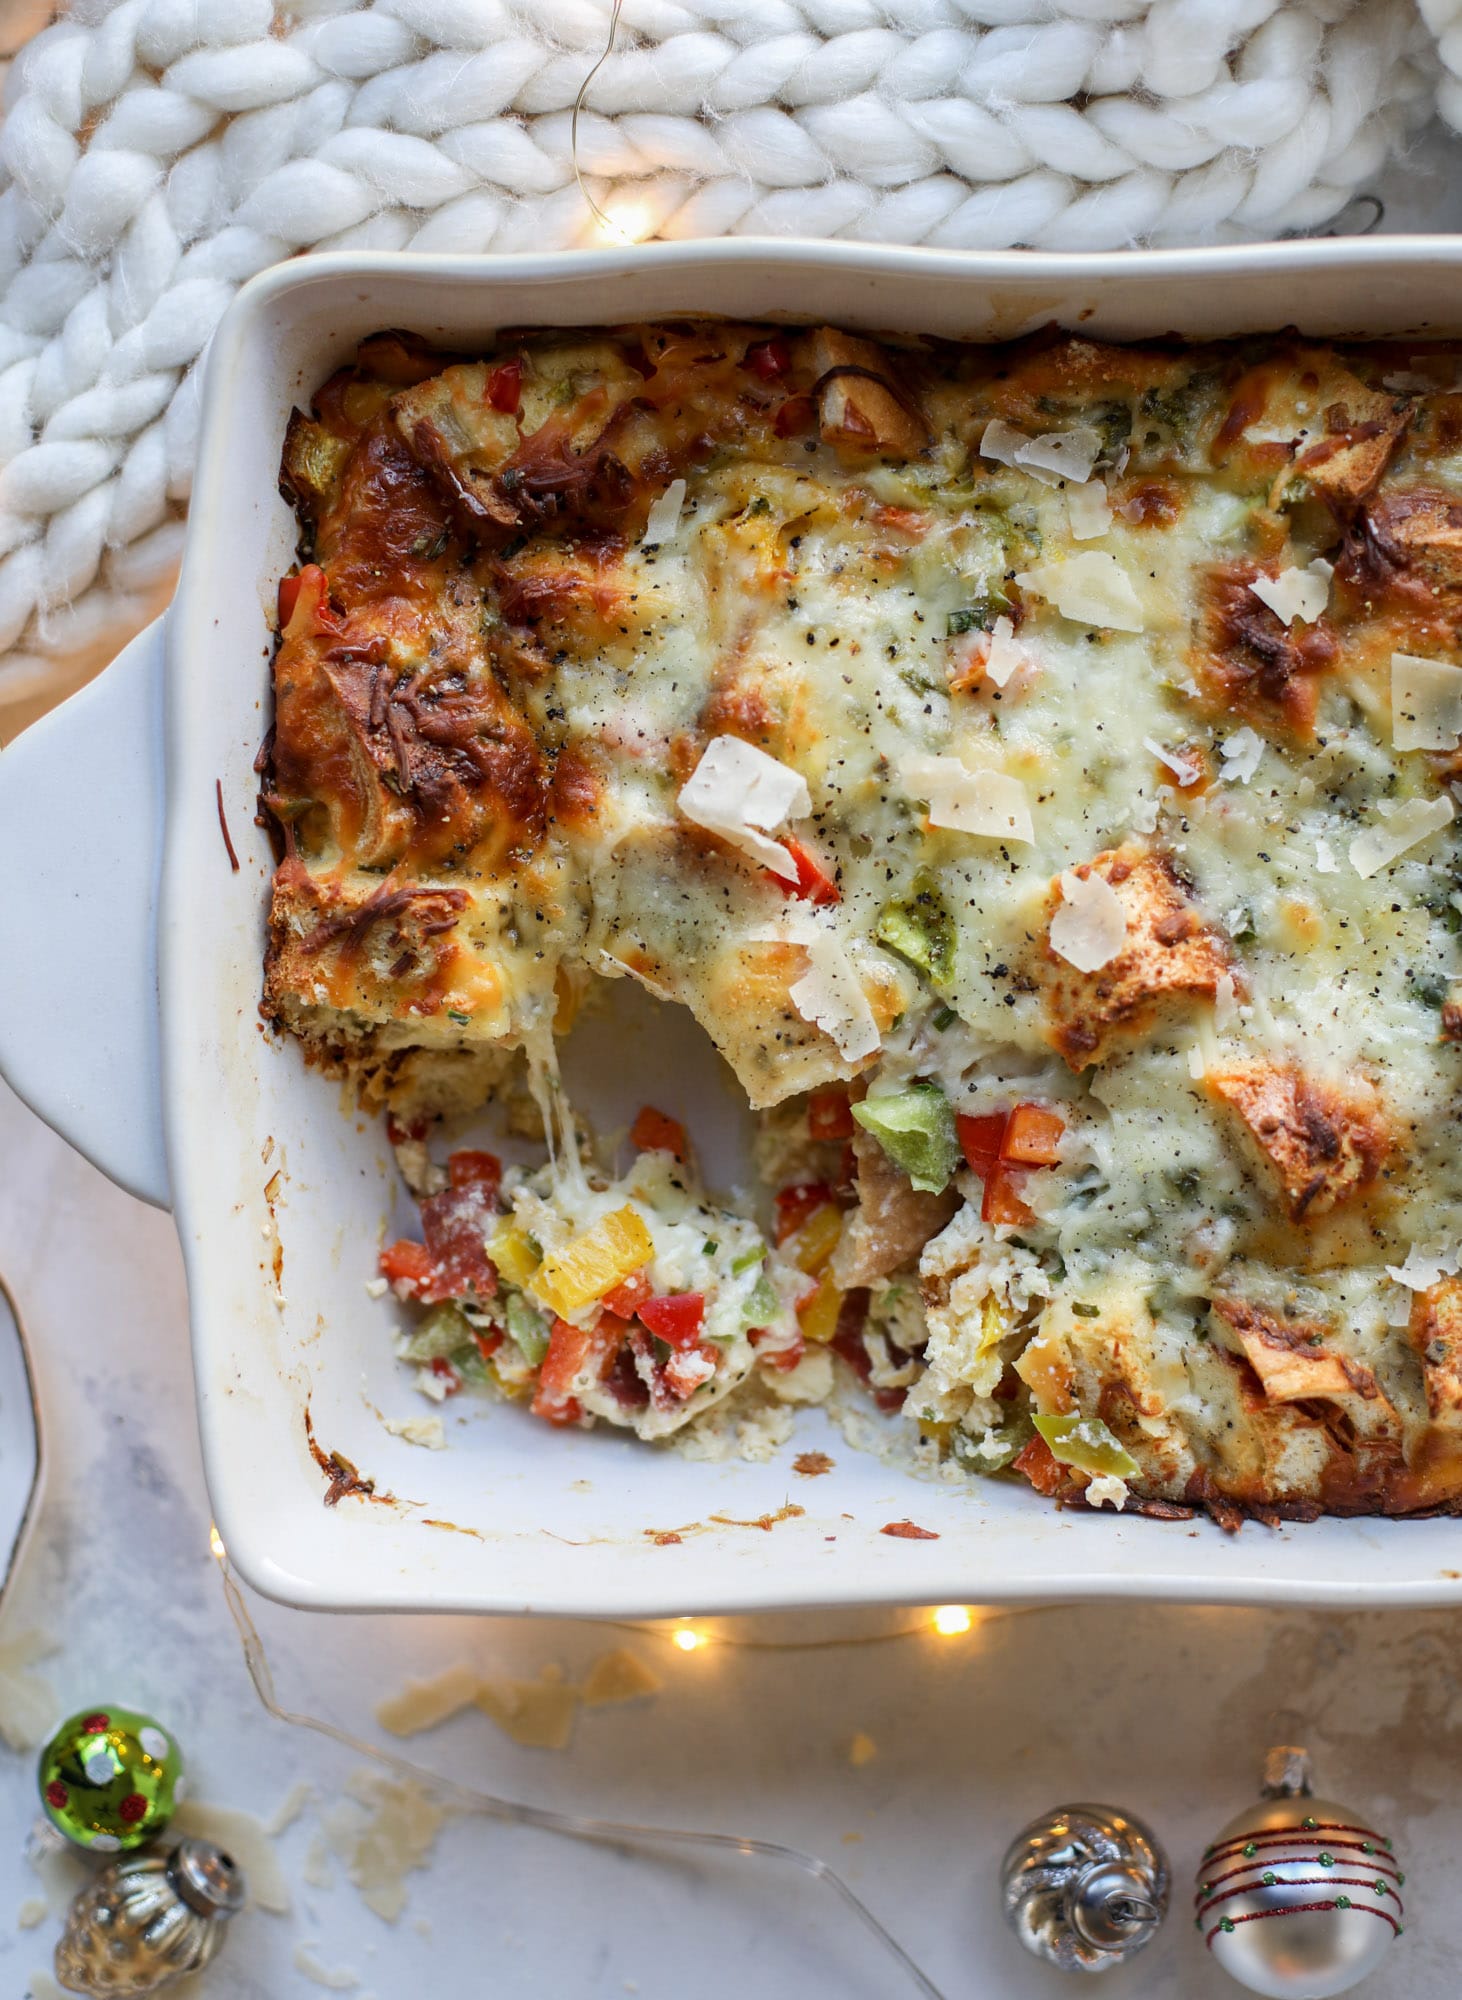 This breakfast strata is super special because the base is built on pepperoni rolls! This make ahead casserole is perfect for holiday brunches or parties and tastes like a supreme pizza. It's so easy to throw together too! I howsweeteats.com #breakfast #strata